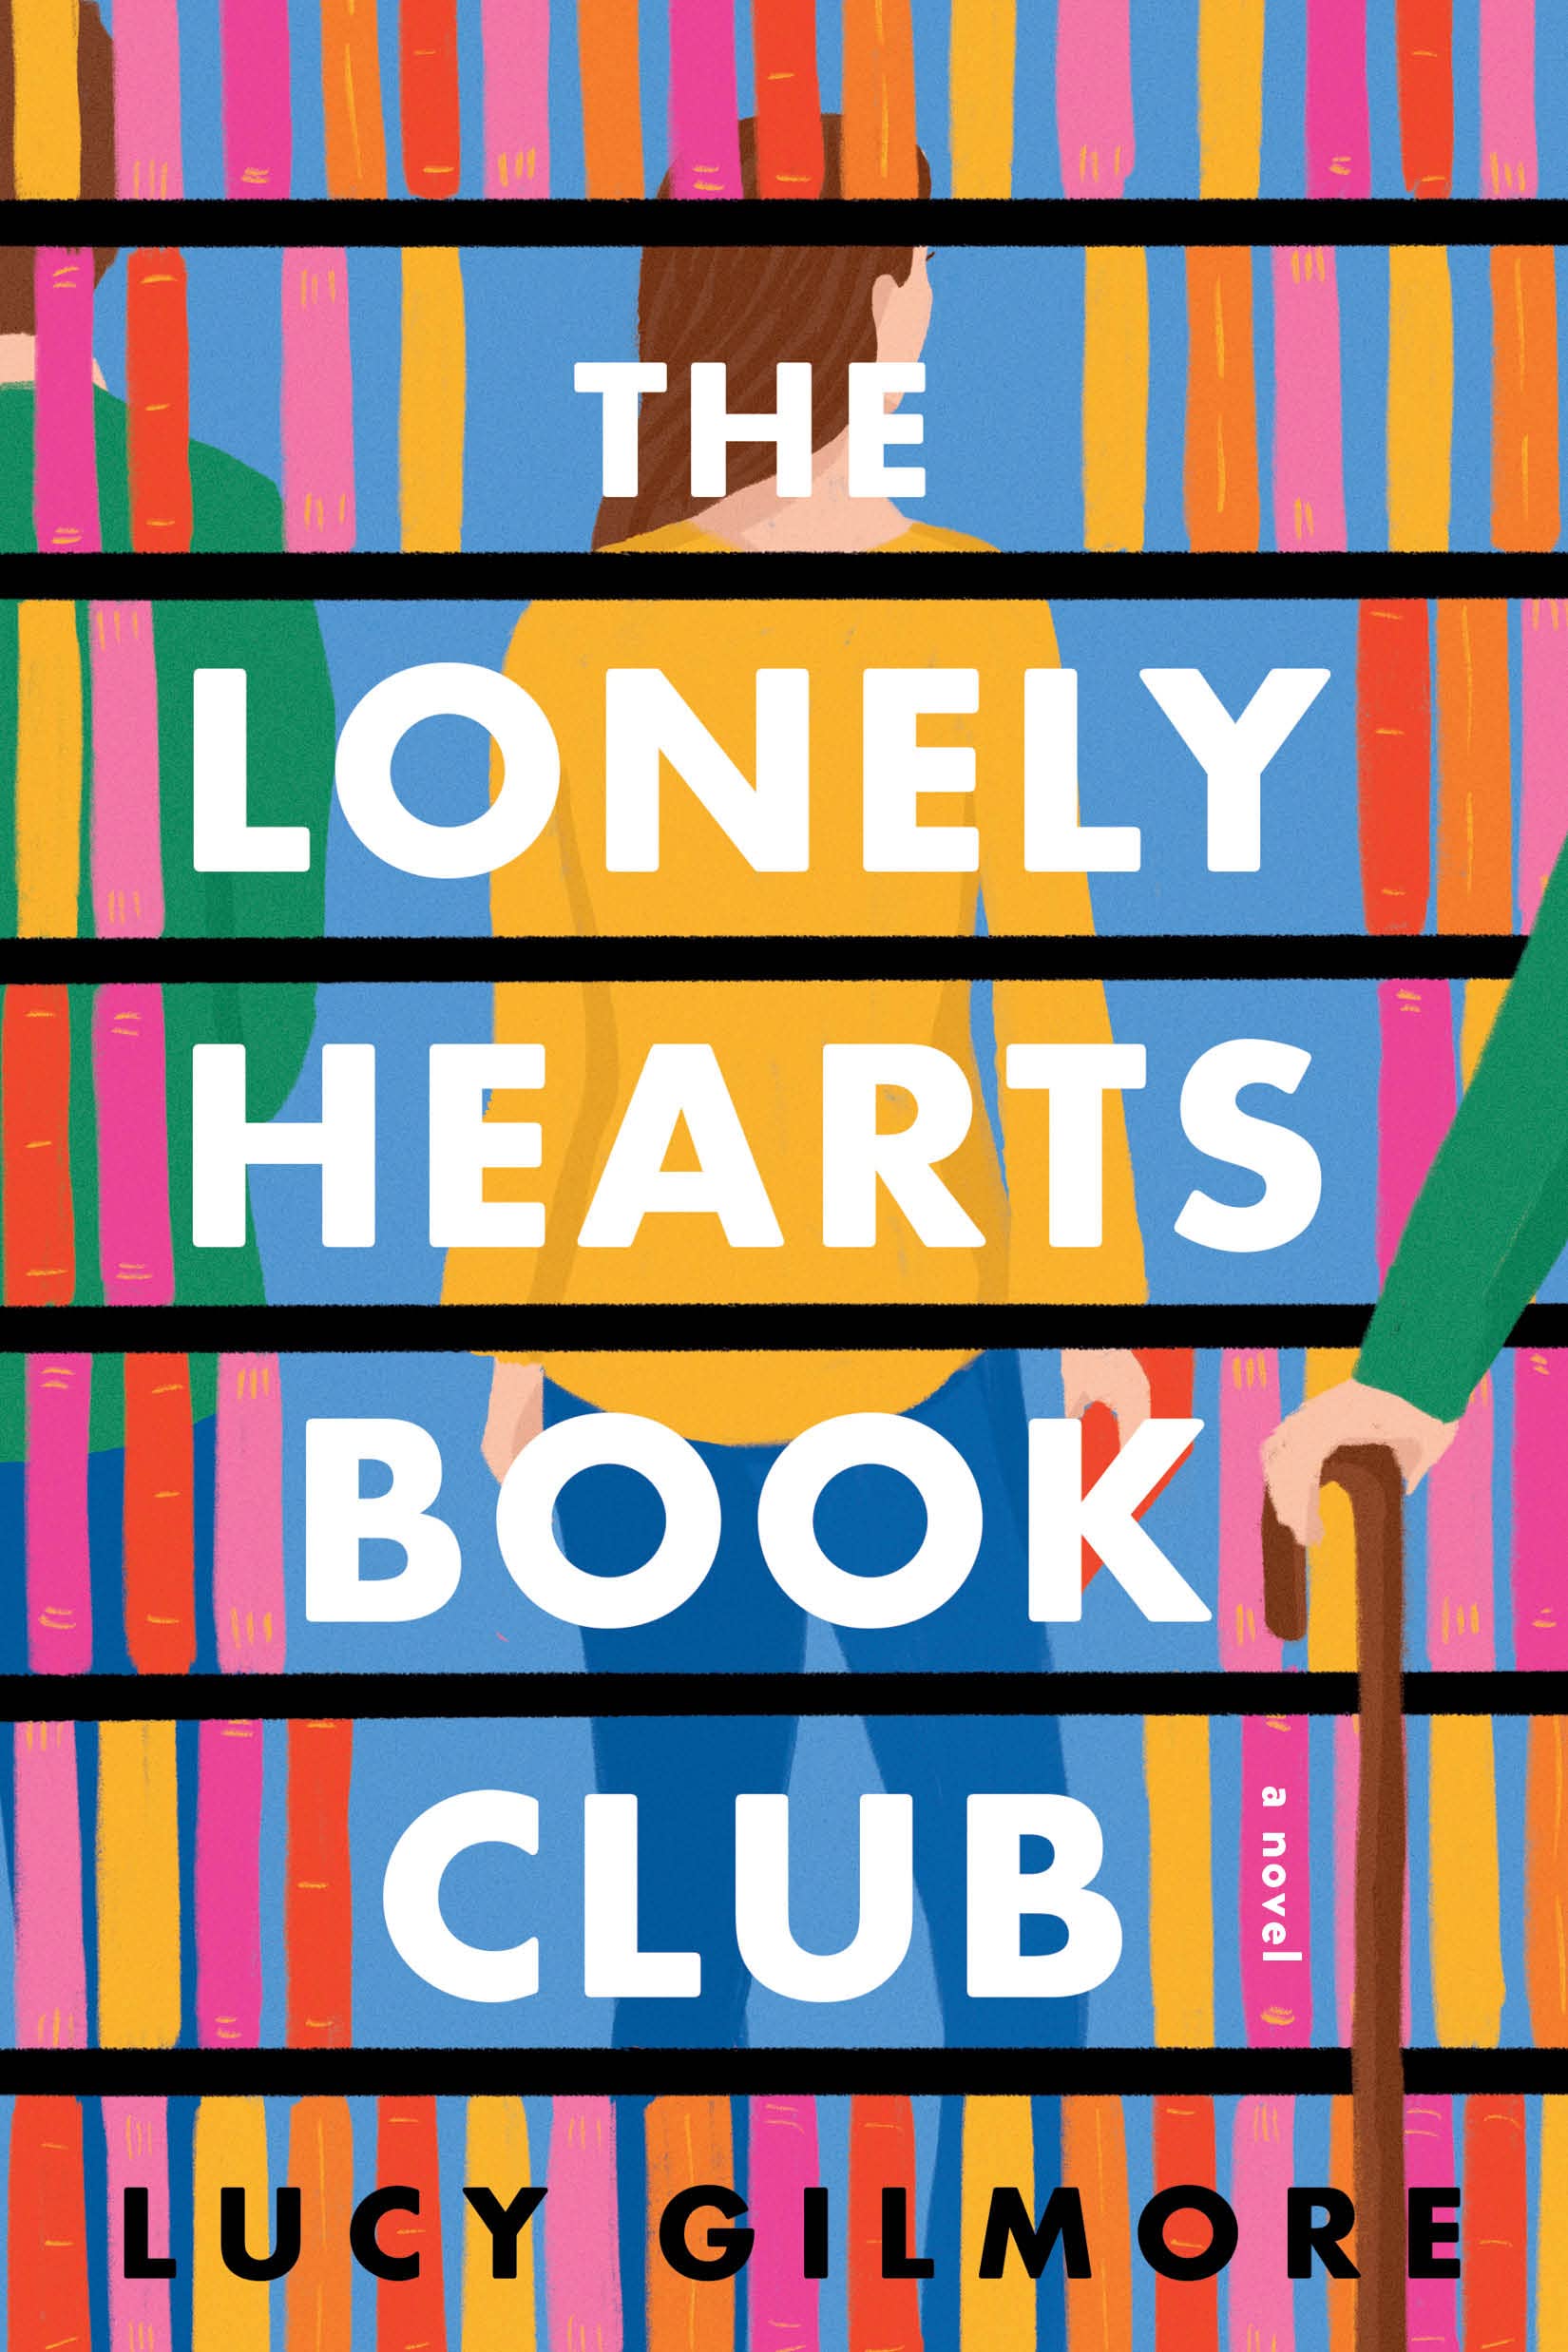 Image for "The Lonely Hearts Book Club"